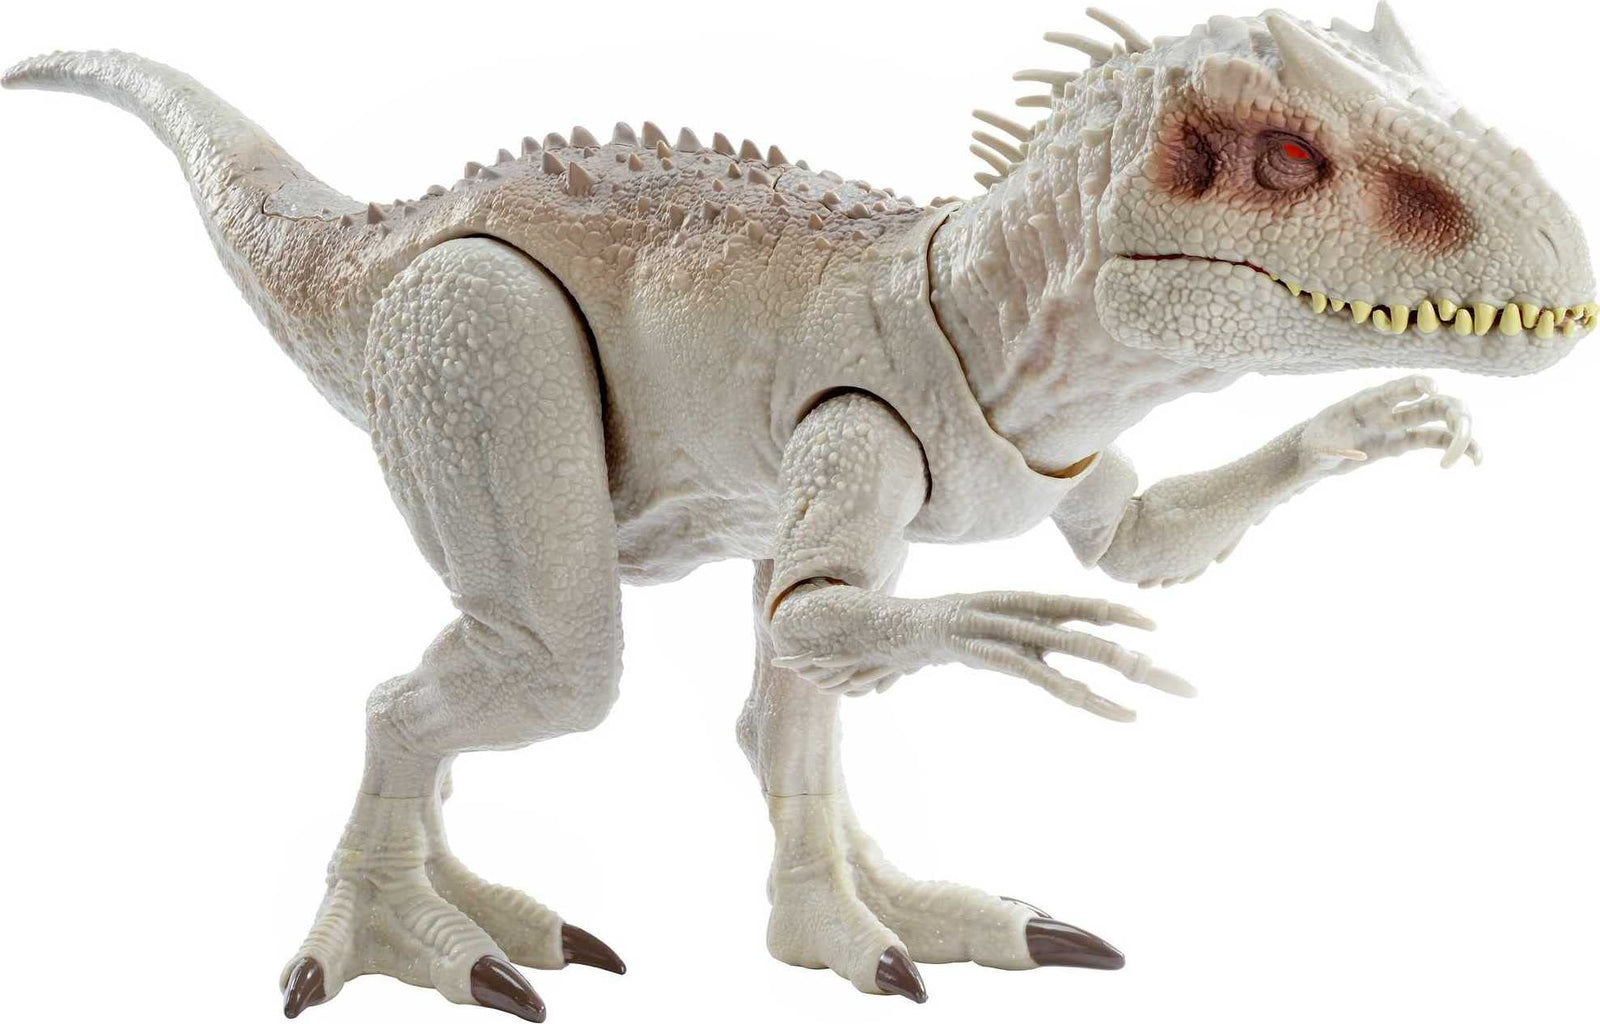 Jurassic World Destroy ‘N Devour Indominus Rex with Chomping Mouth, Slashing Arms, Lights & Realistic Sounds, Swallows 3 ¾ Human Action Figures 